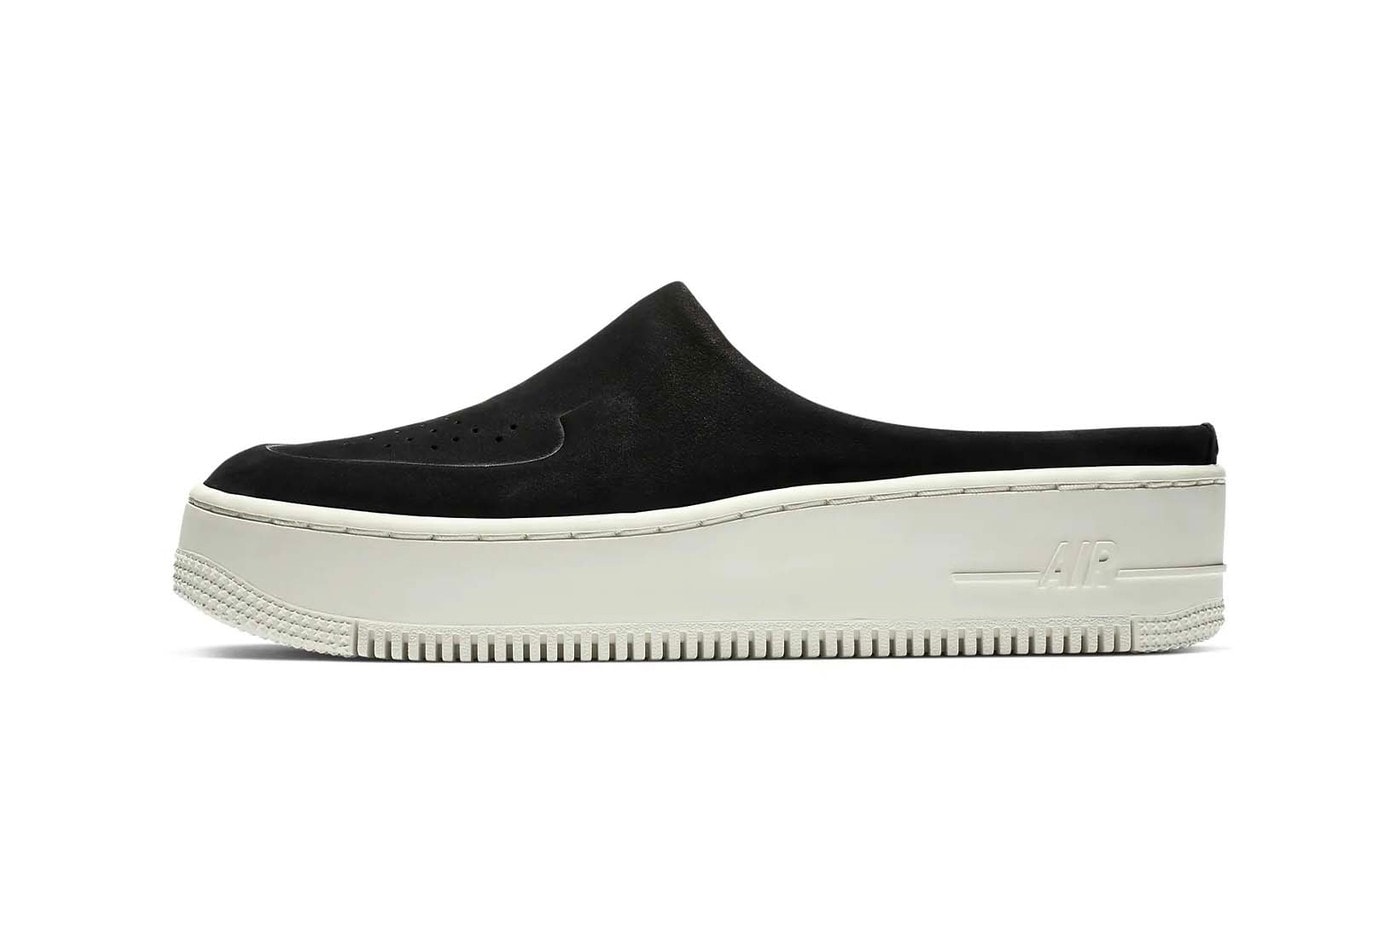 Nike's Air Force 1 Lover XX Premium Women's Shoes Mule Returns BV8249 001 slip on silhouette release info date price